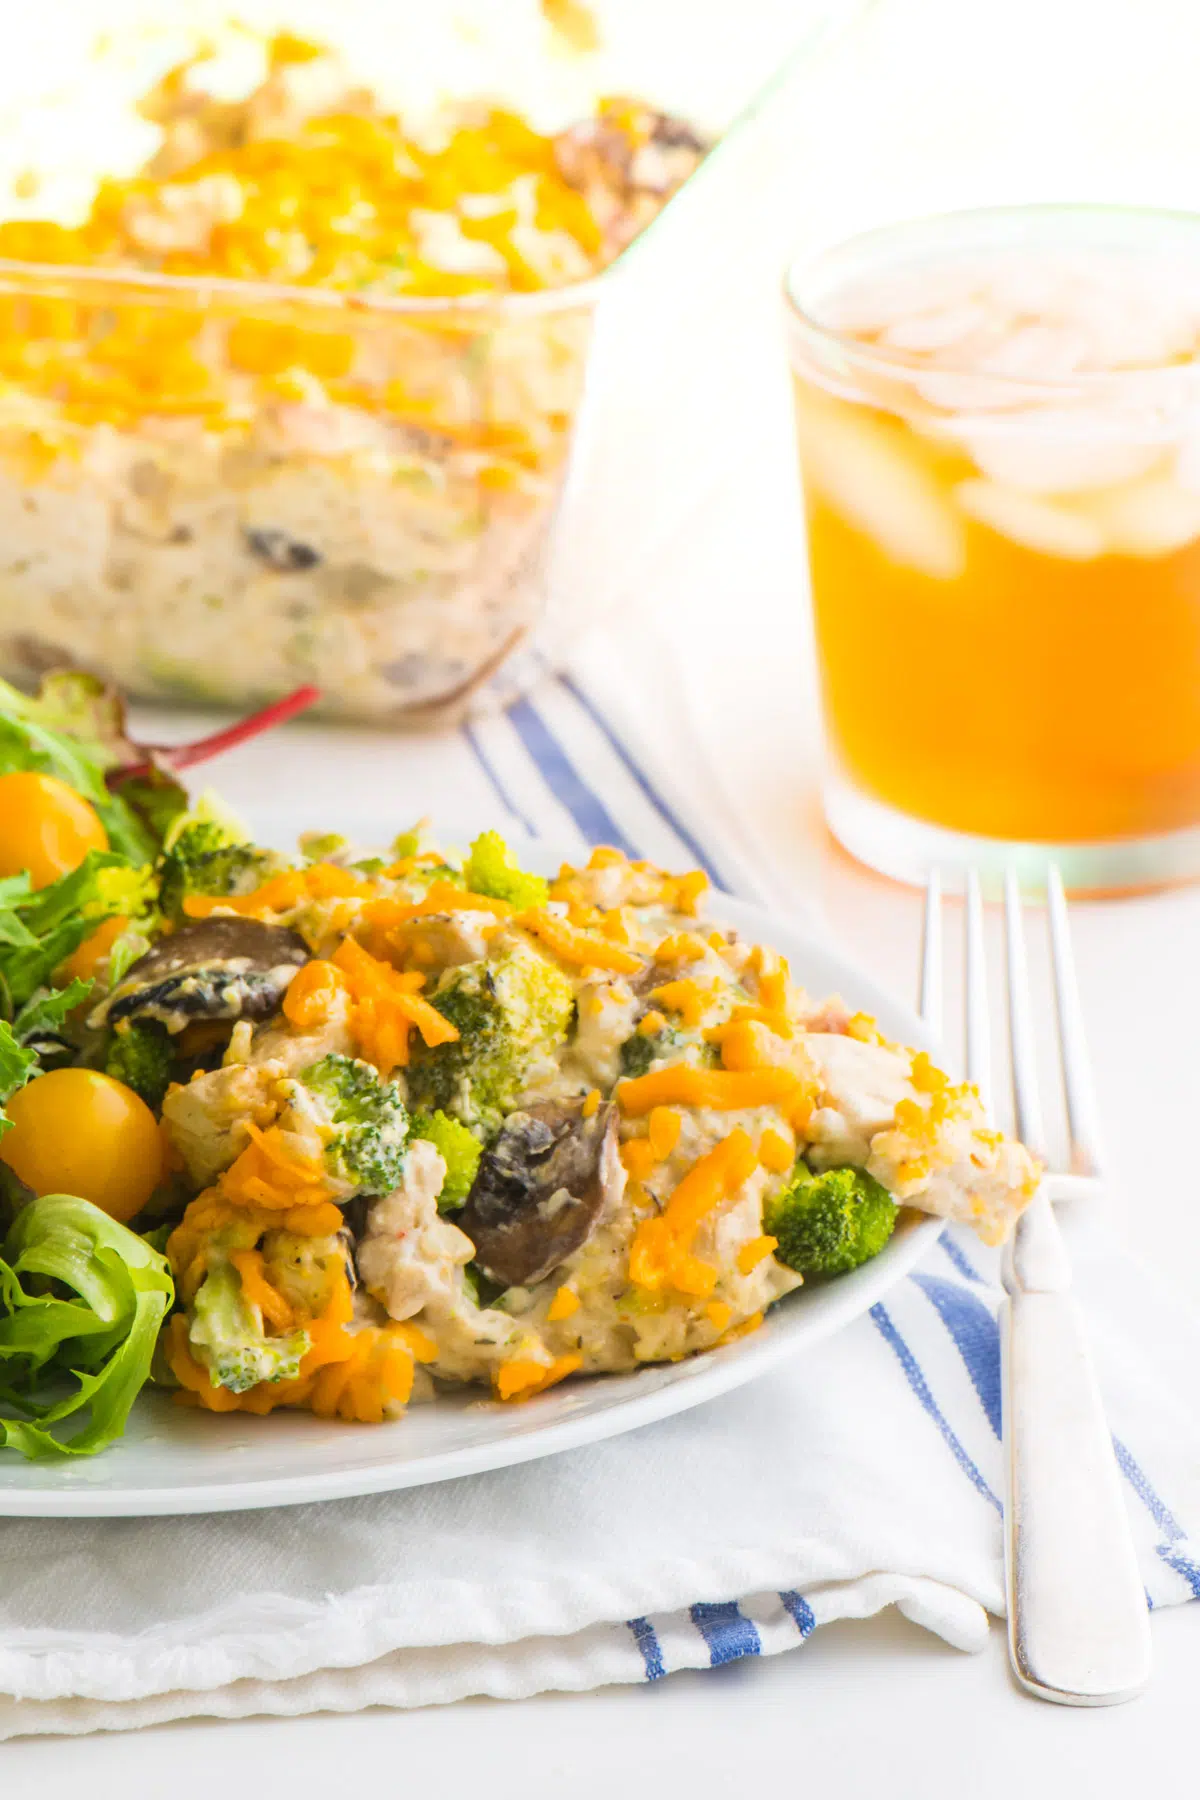 A serving of vegan chicken and rice casserole on a plate with a green salad. A fork is sitting next to it, with a glass of iced tea and the rest of the casserole behind it.